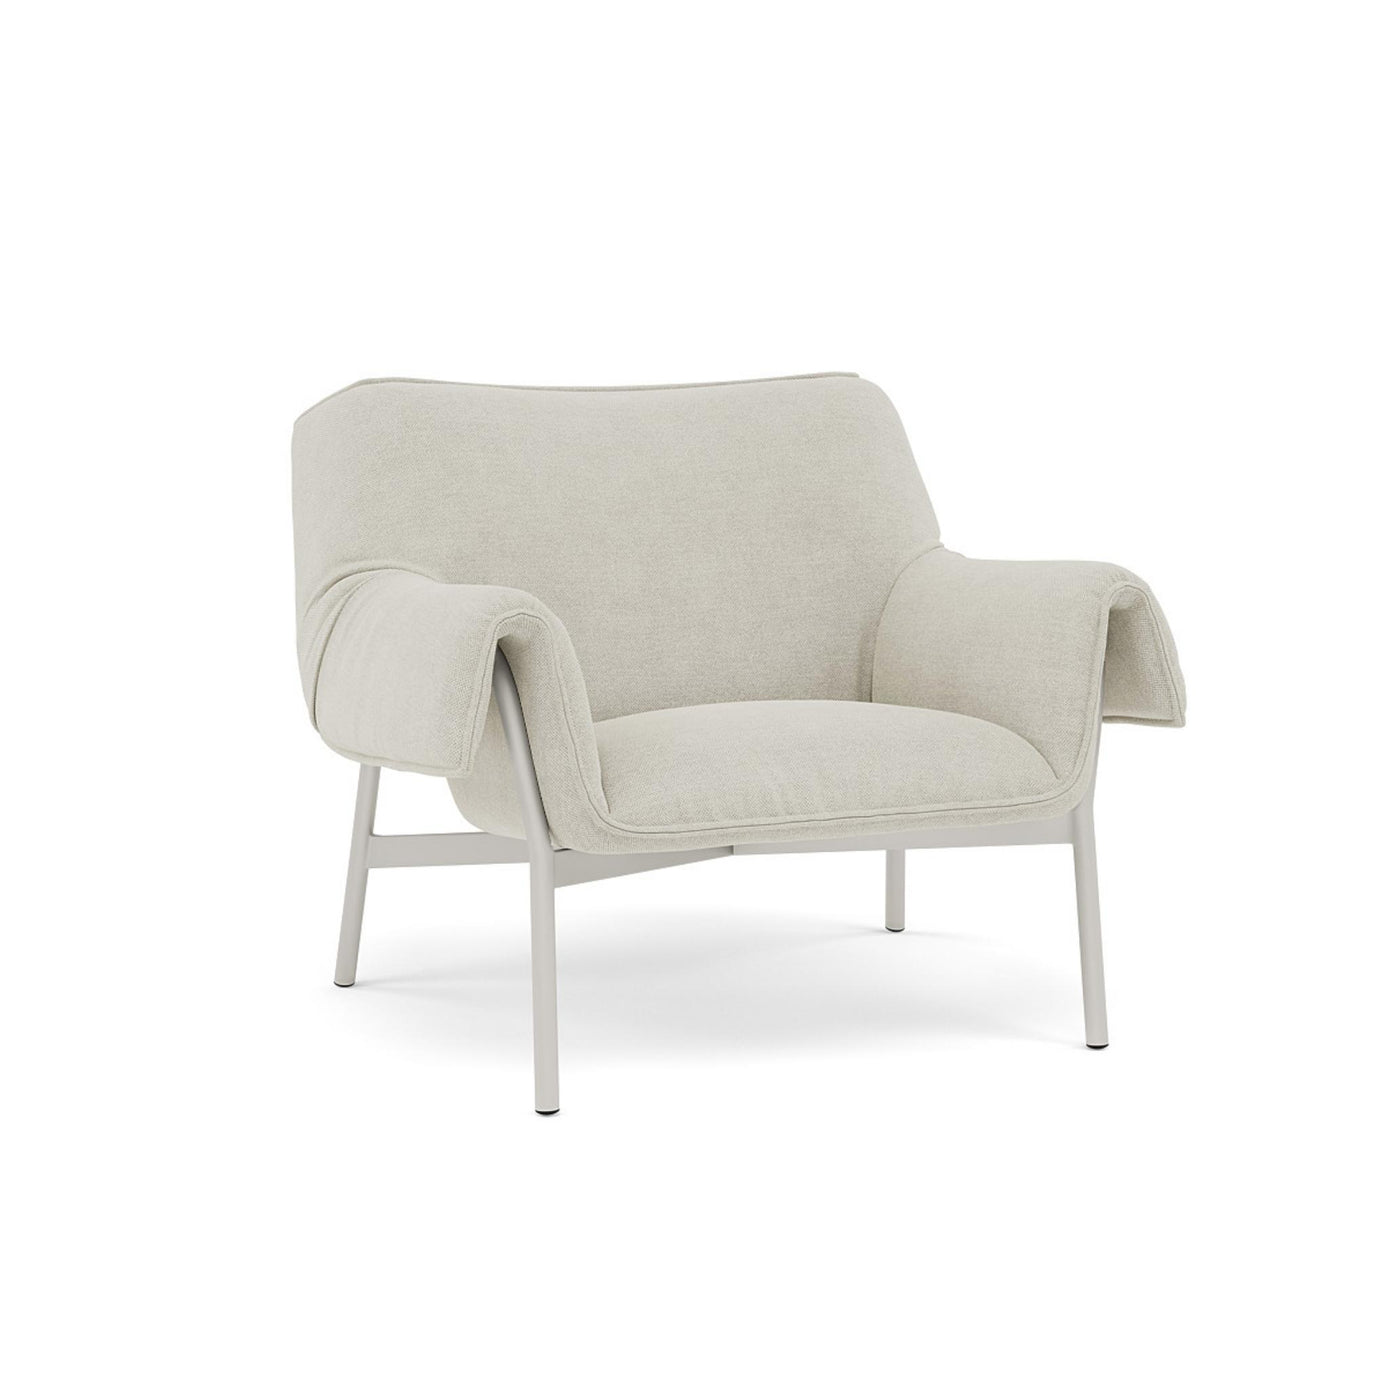 Muuto Wrap Lounge Chair. Made to order from someday designs. #colour_fiord-101